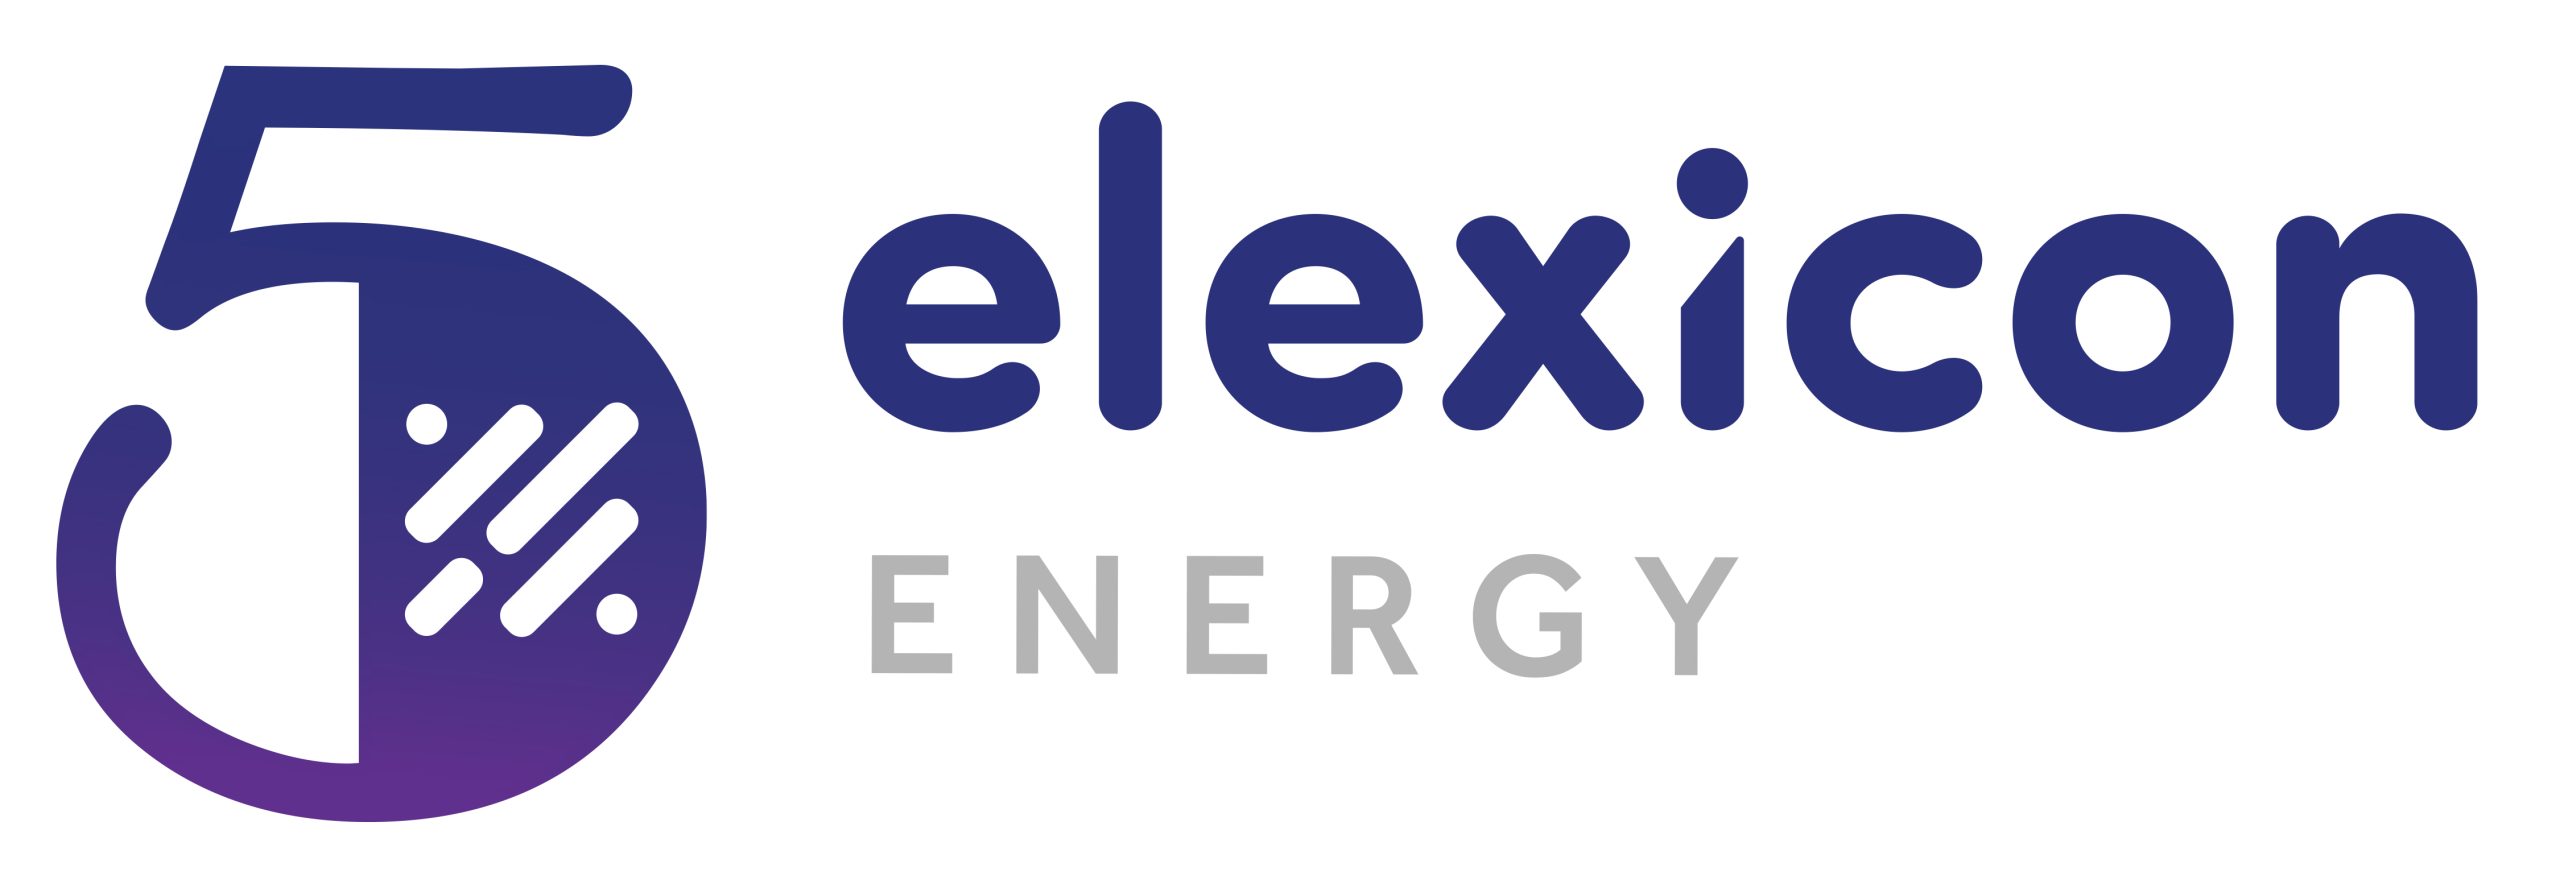 Elexicon Energy Celebrating Five Years of Excellence Logo